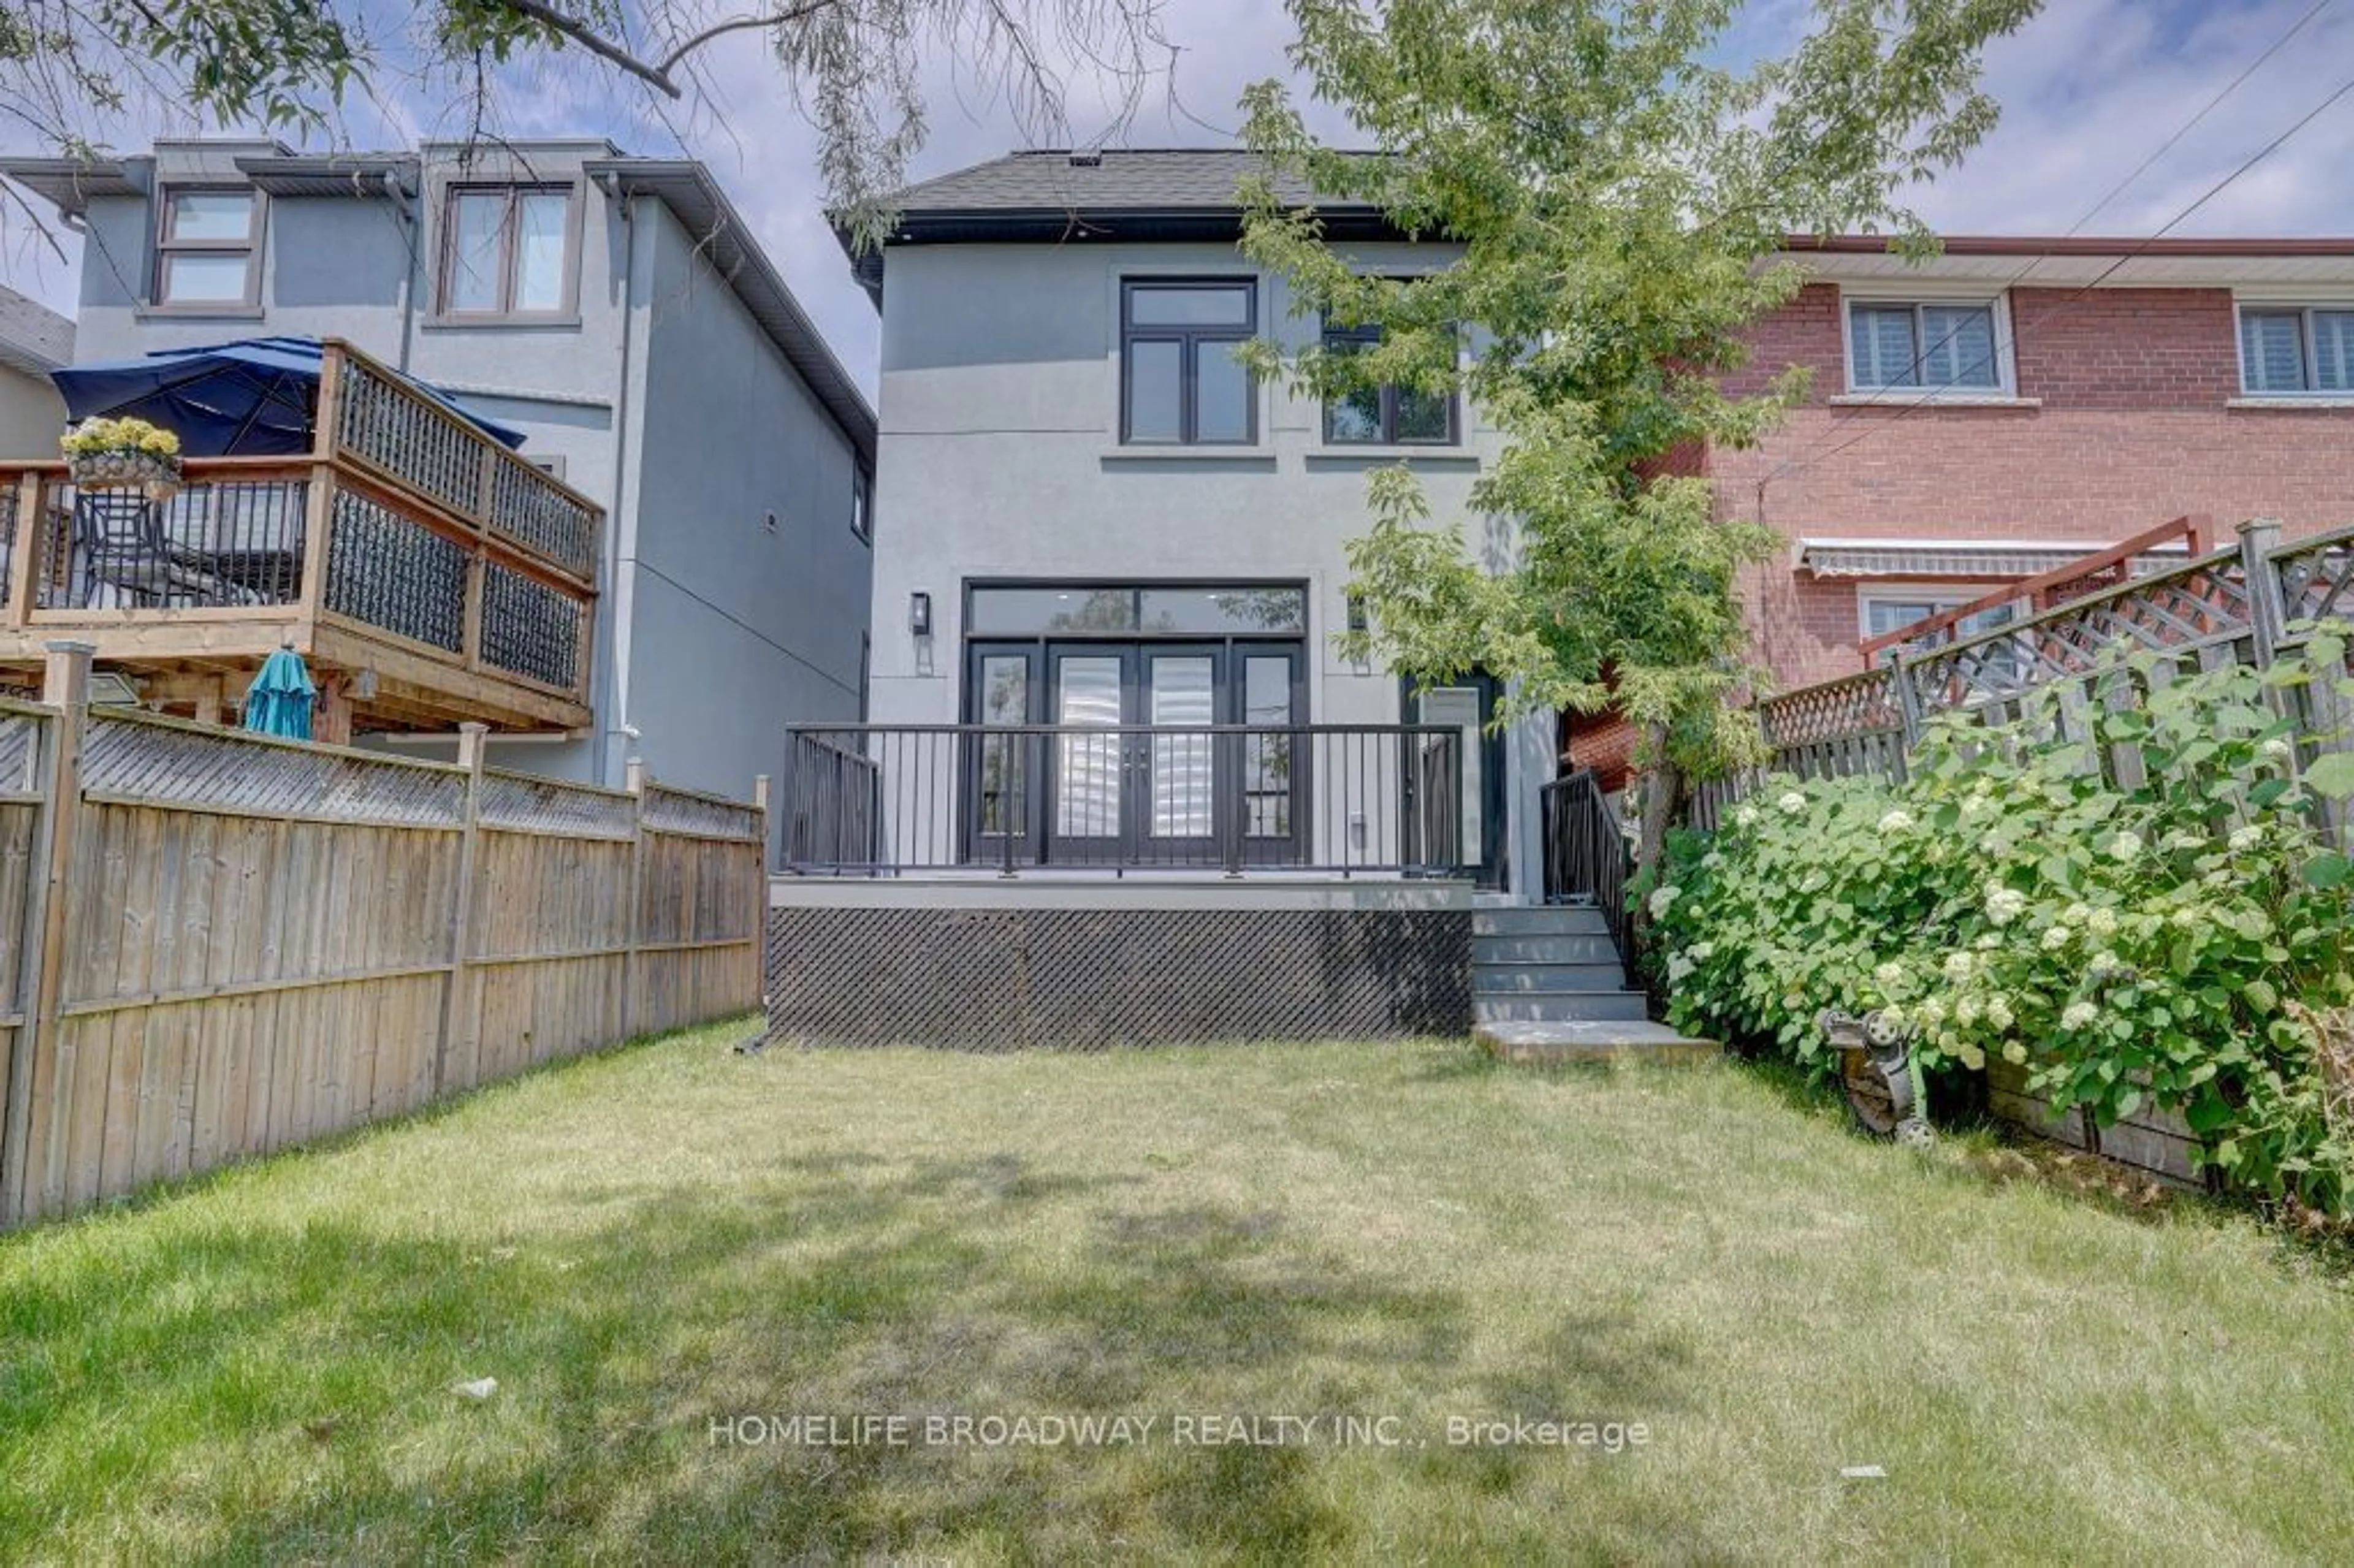 Frontside or backside of a home for 75 Holmstead Ave, Toronto Ontario M4B 1T3